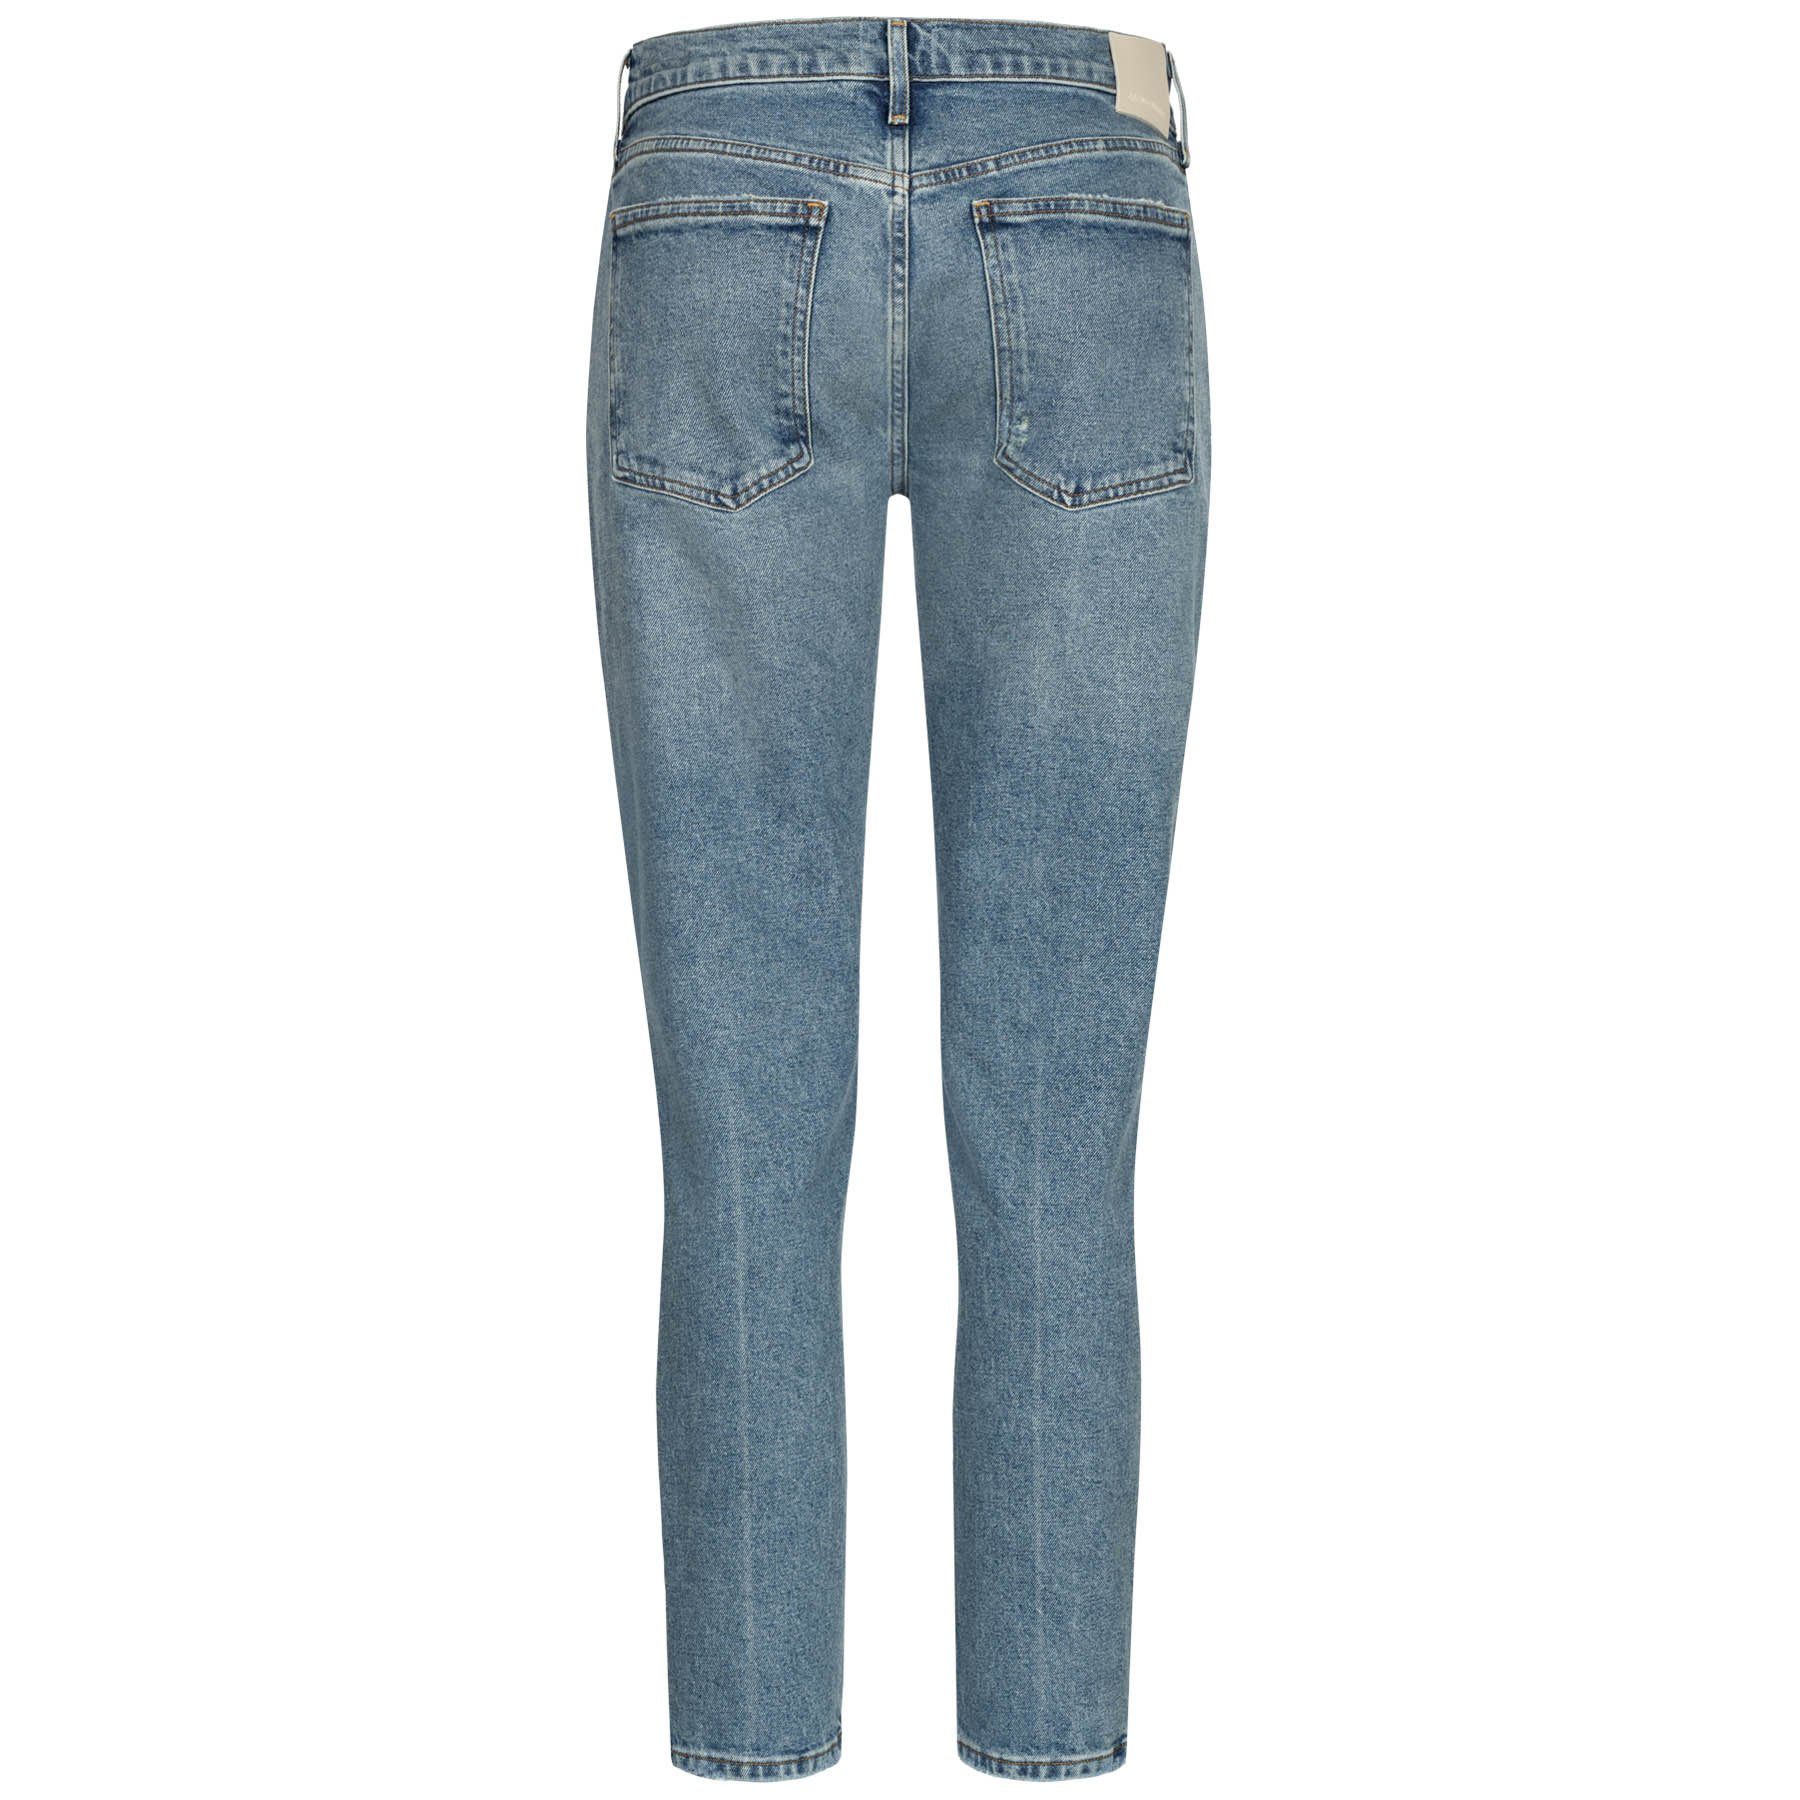 aus RACER Slim-fit-Jeans Baumwolle CITIZENS HUMANITY Jeans OF